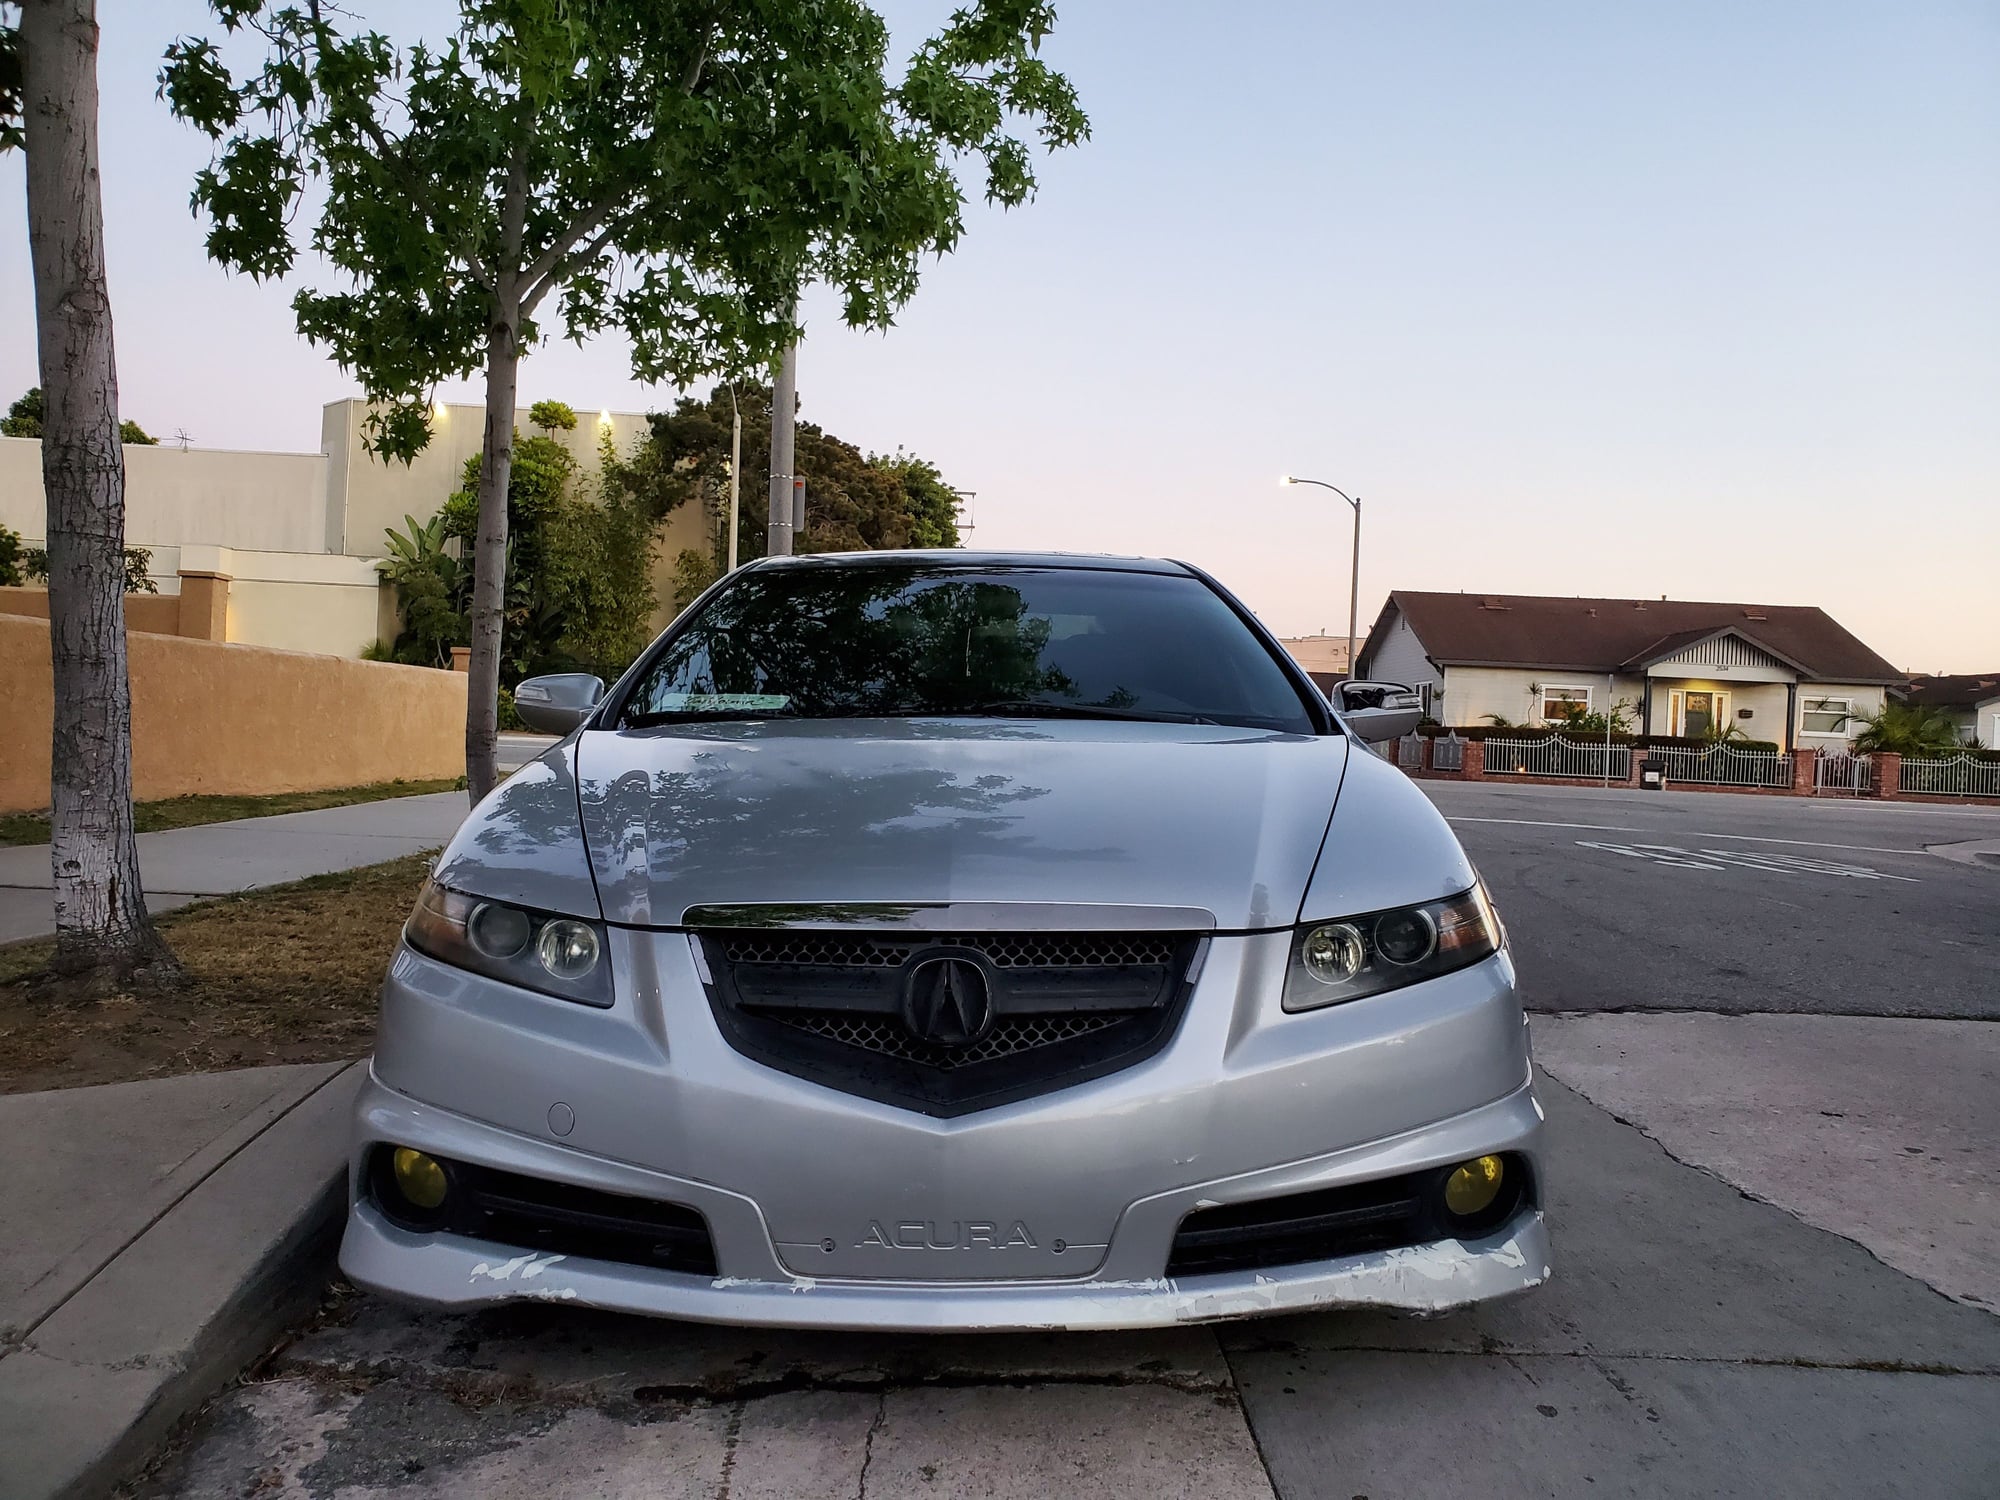 2007 Acura TL - CLOSED: 2007 Acura TL Type S - 6 speed manual, CLEAN TITLE, 174k miles, silver - Used - VIN 19UUA75687A036478 - 174,000 Miles - 6 cyl - 2WD - Manual - Sedan - Silver - Long Beach, CA 90804, United States